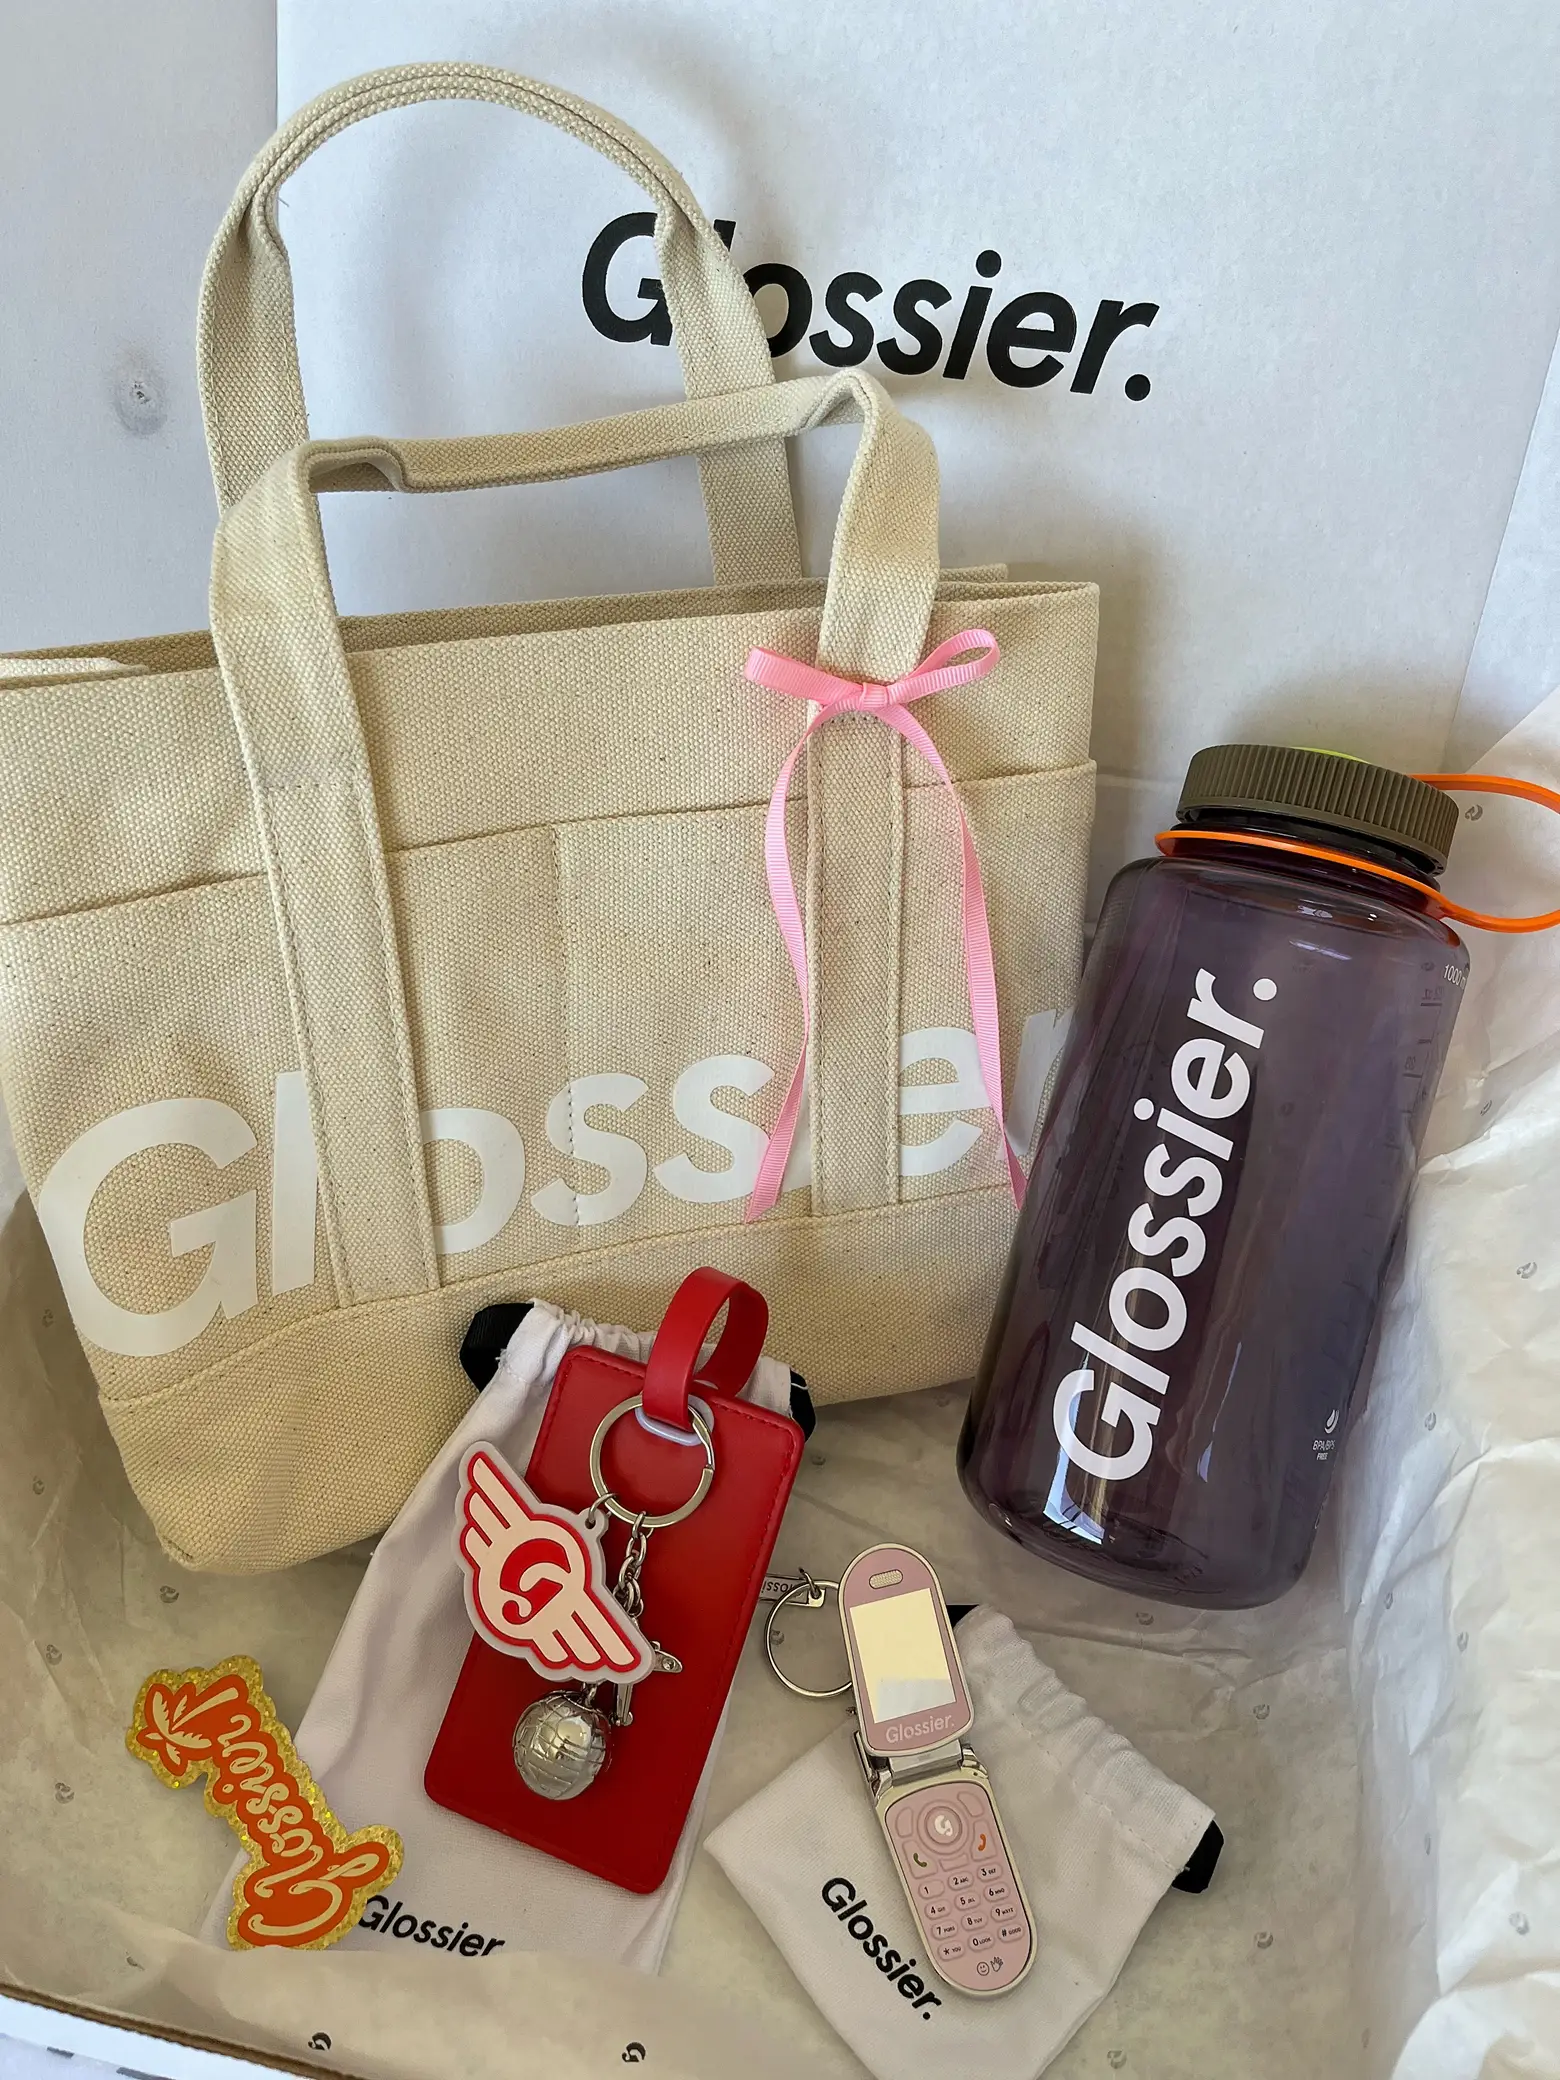 Glossier haul! So excited for my makeup bag 💖 : r/glossier